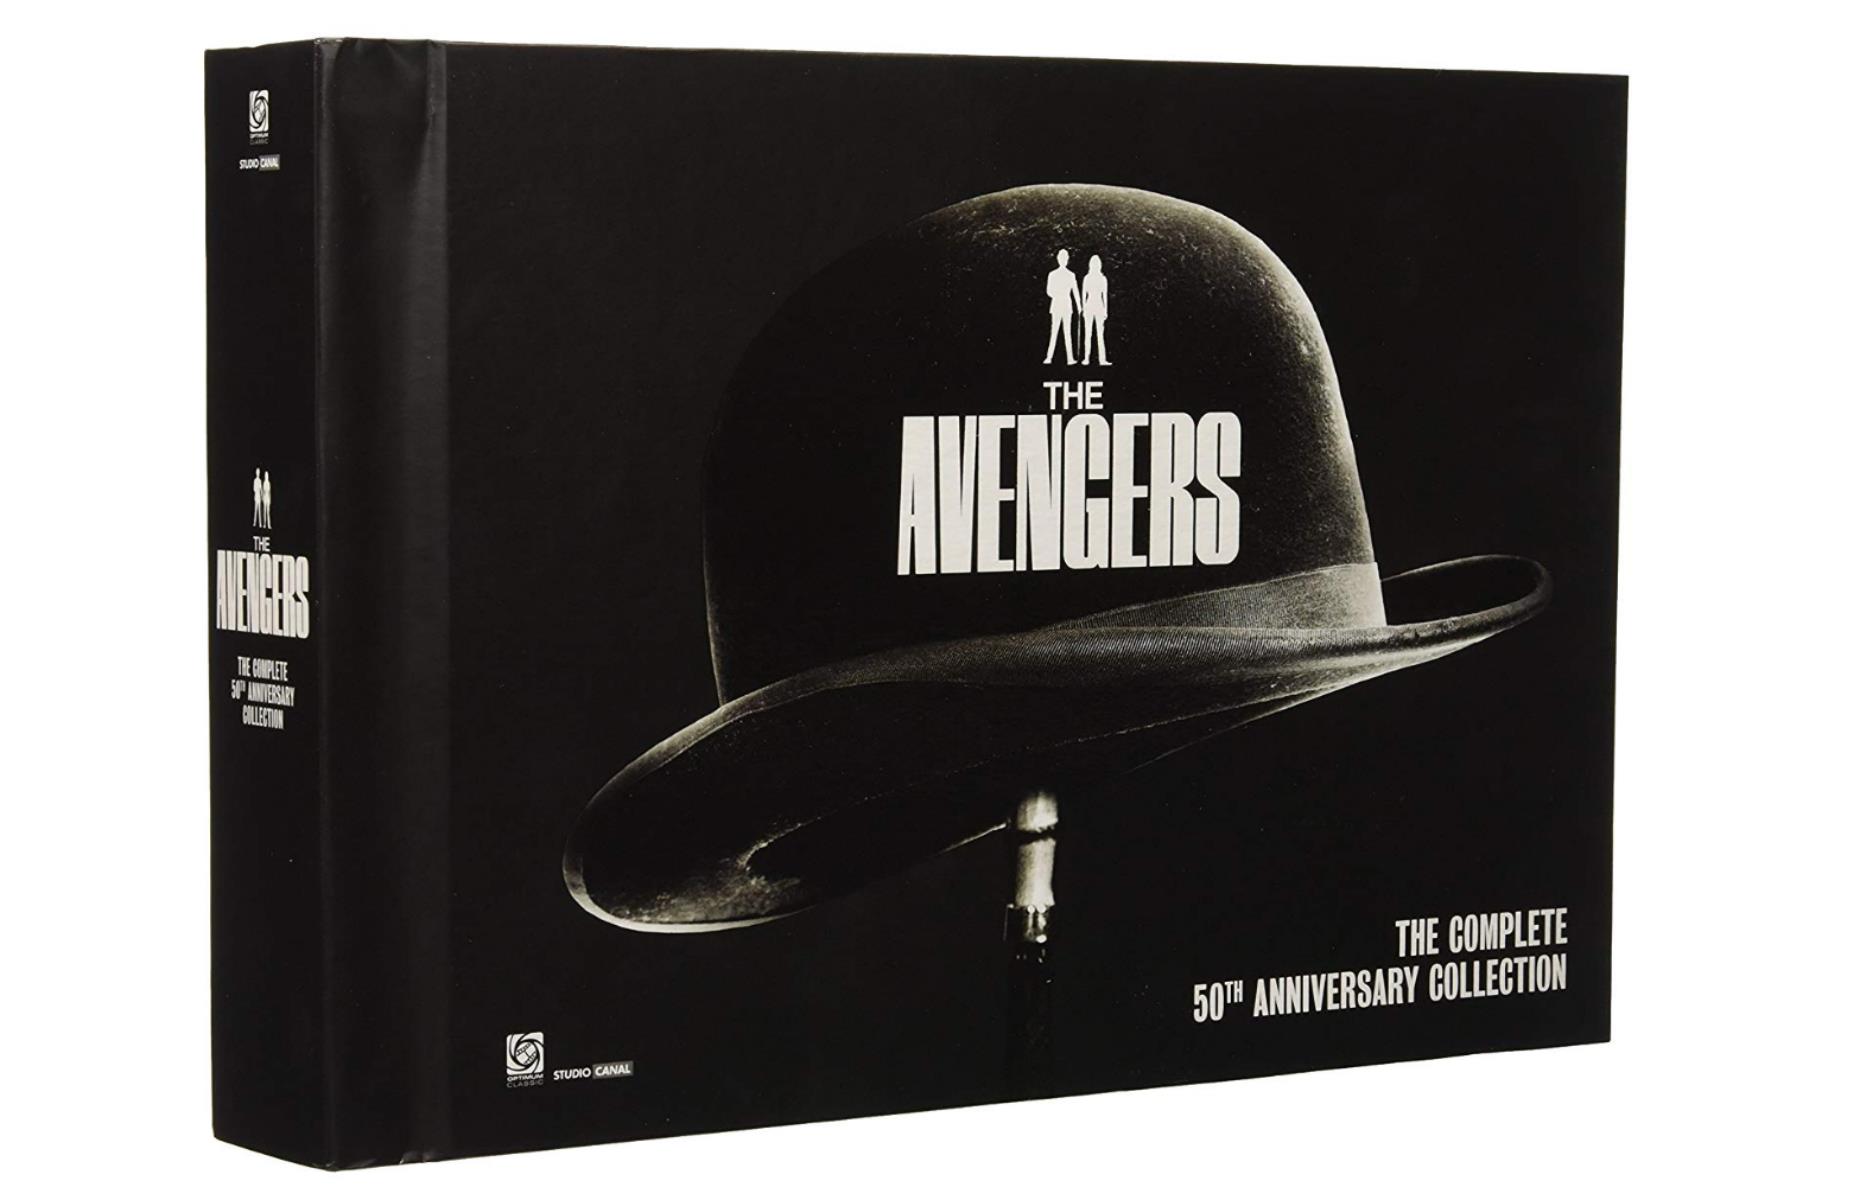  The Avengers: The Complete 50th Anniversary Collection DVD Box Set